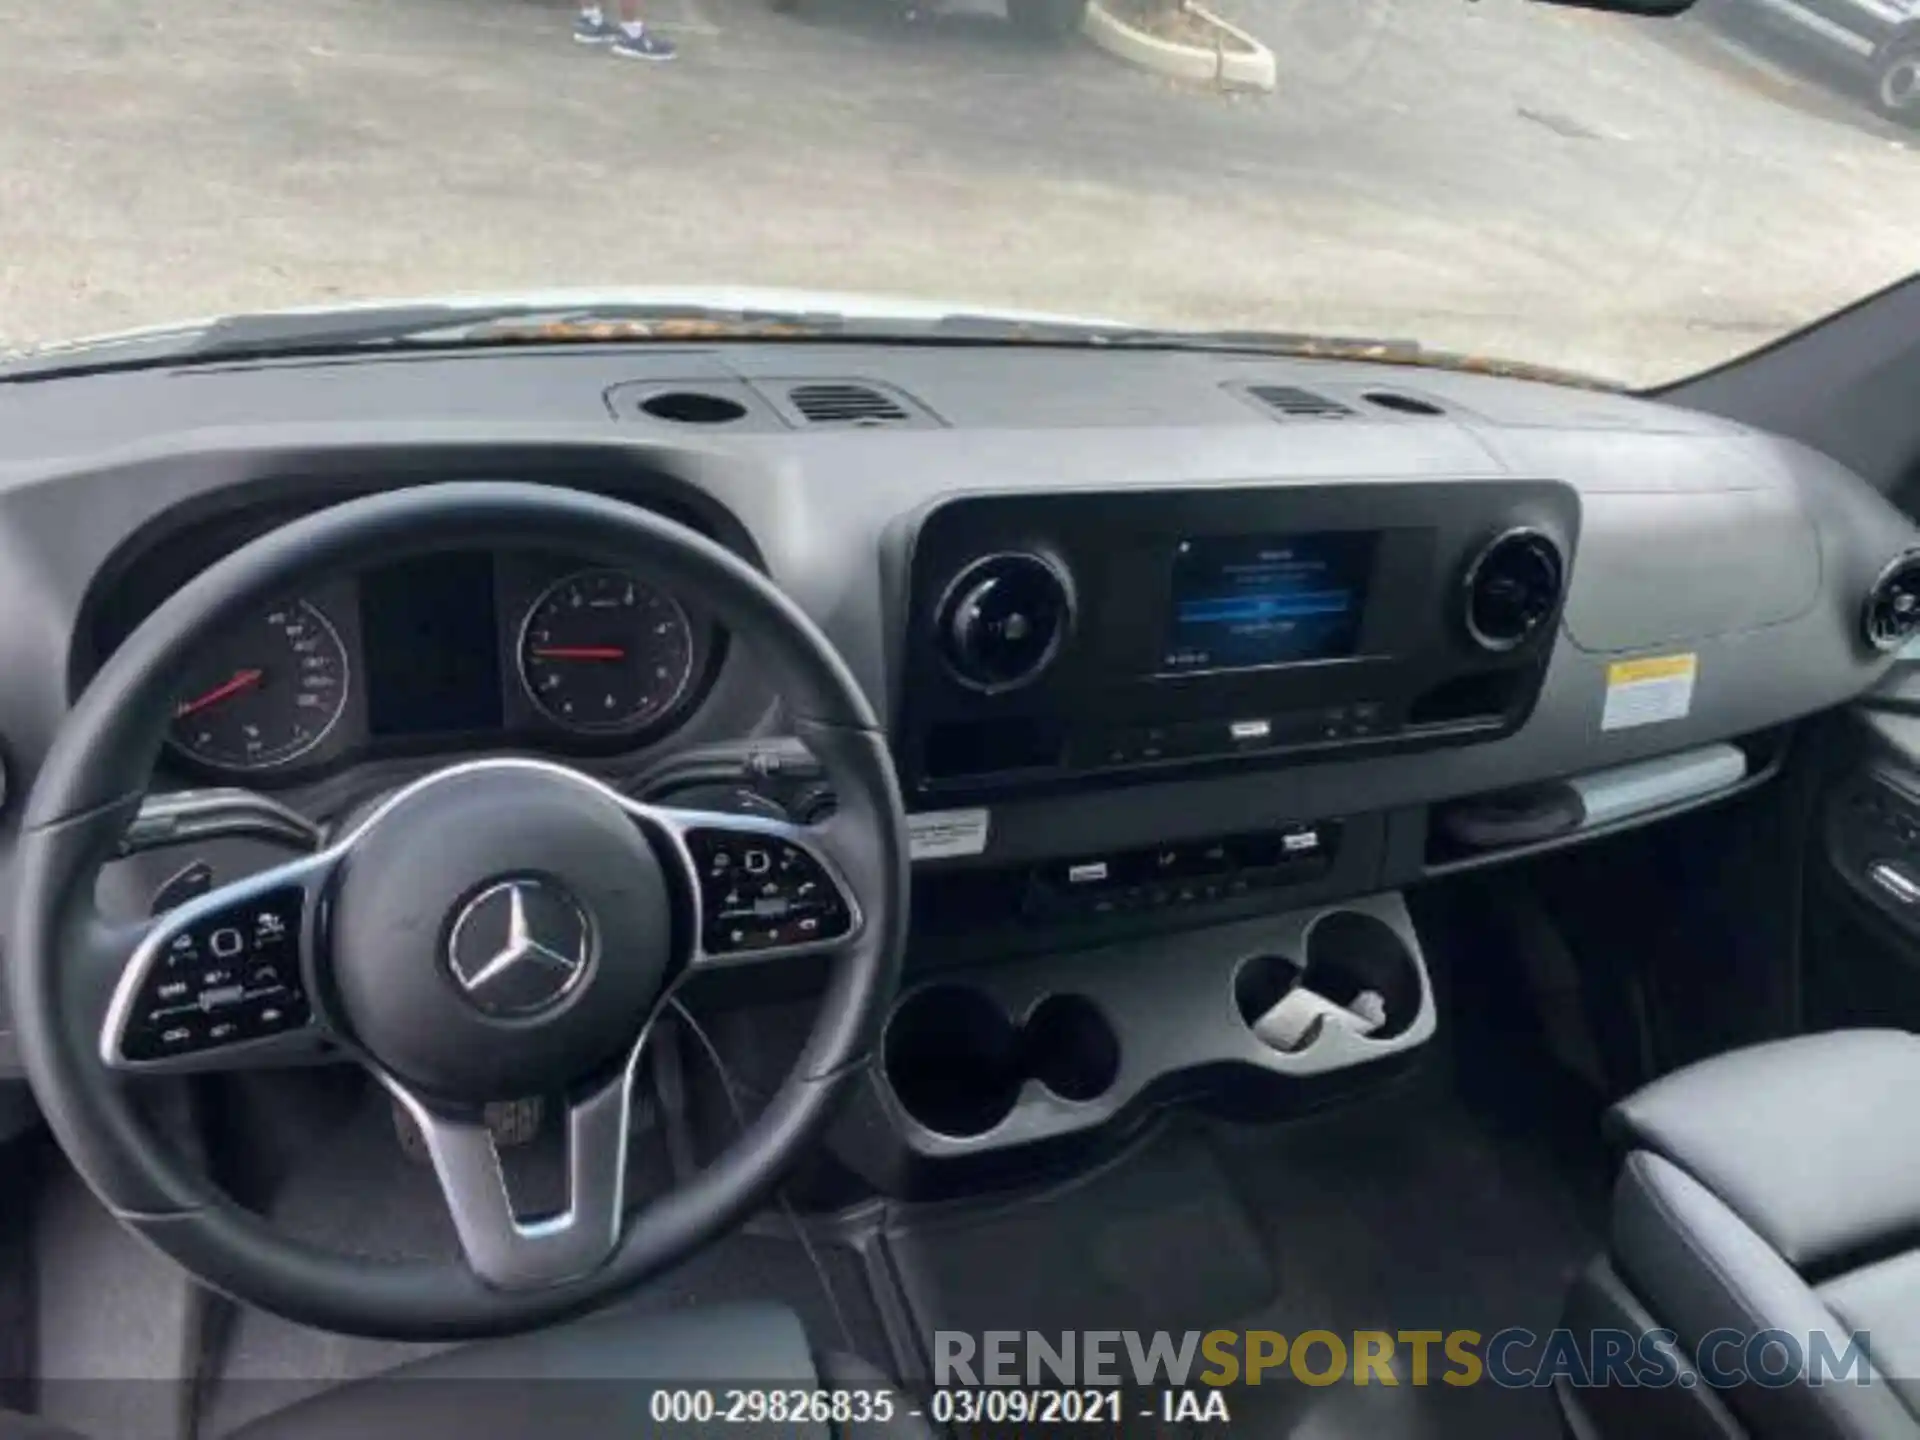 5 Photograph of a damaged car WDAPF4CD6KN015095 MERCEDES-BENZ SPRINTER CAB CHASSIS 2019